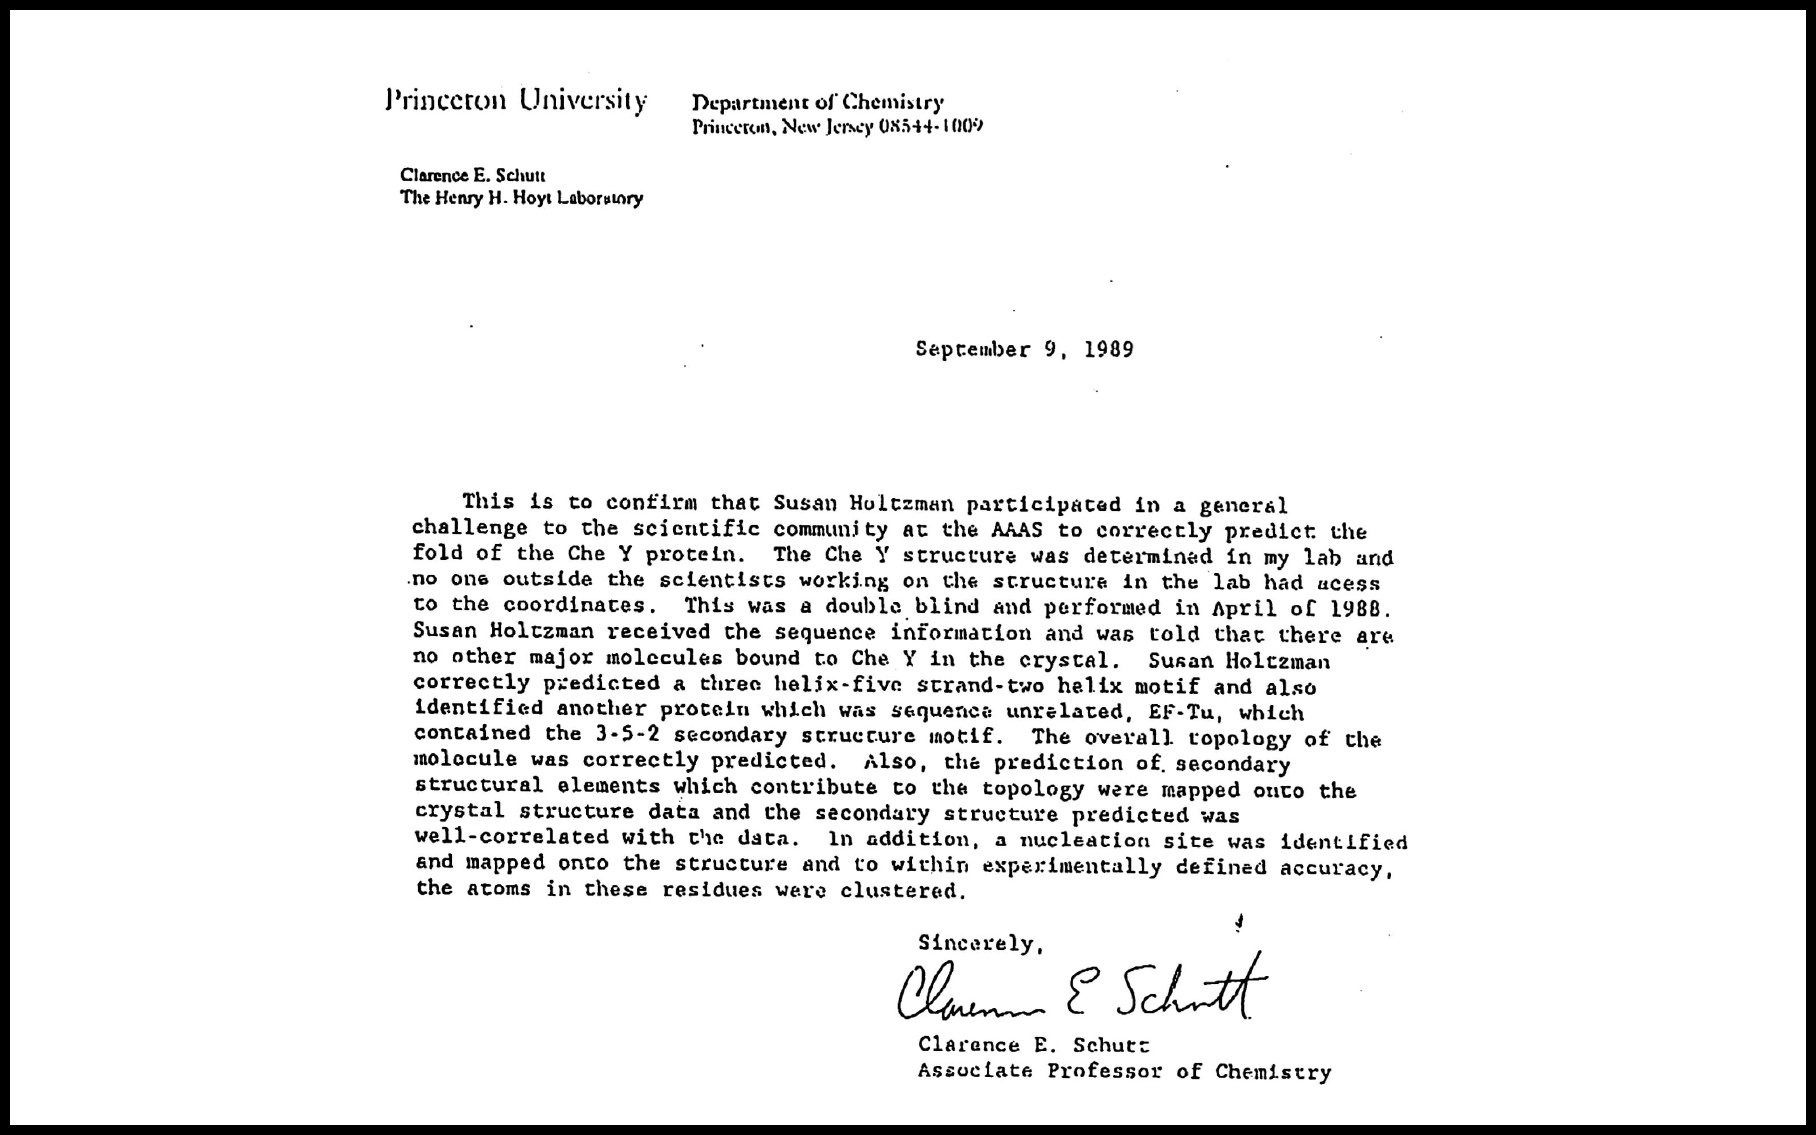 April 1988 “Protein Structure AAAS General Challenge” at Princeton, New Jersey, U.S.A.